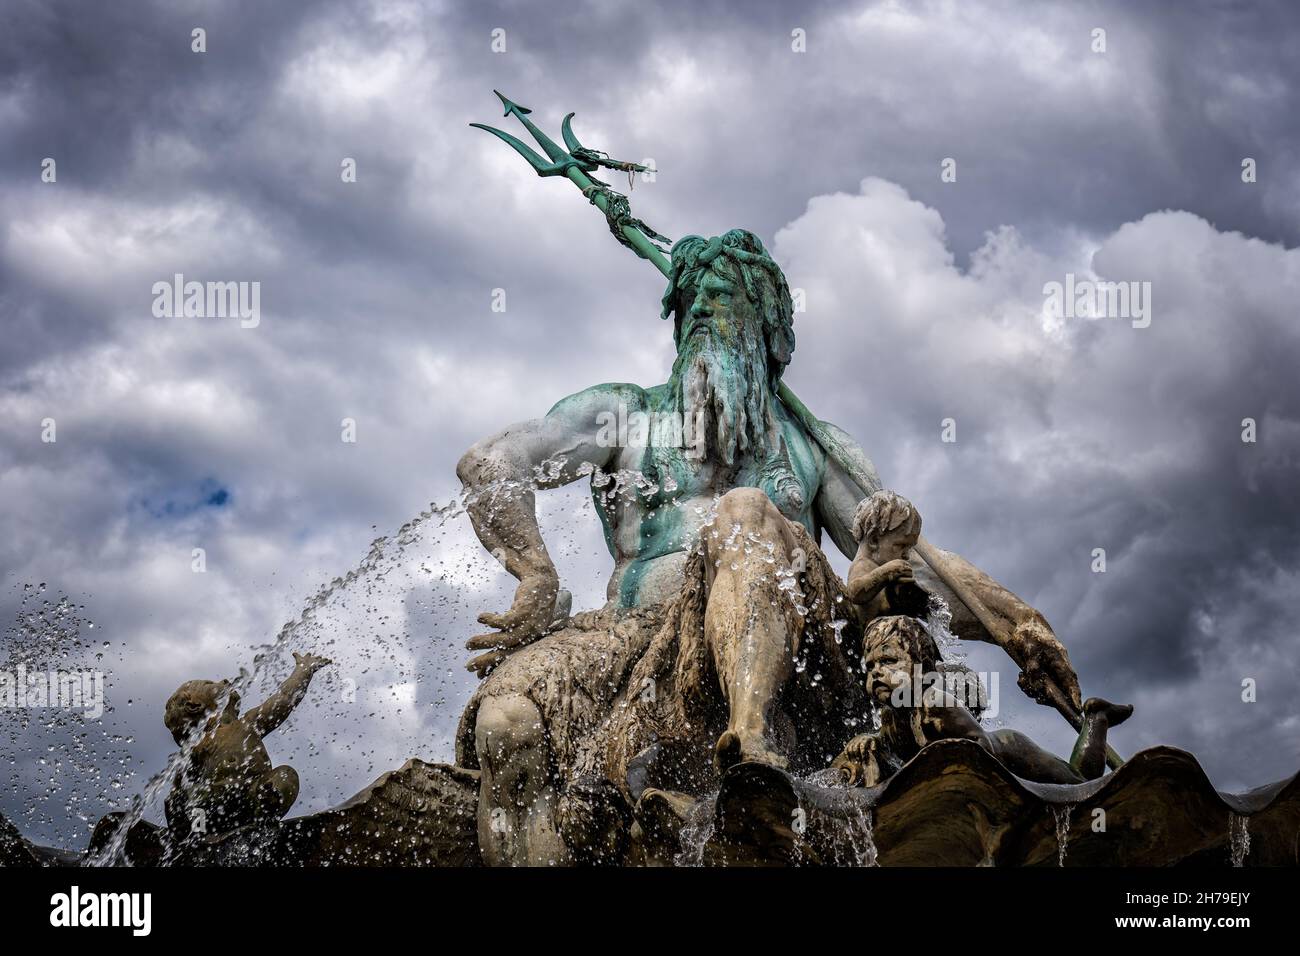 The Neptune Fountain Against Cloudy Sky In Berlin Germany